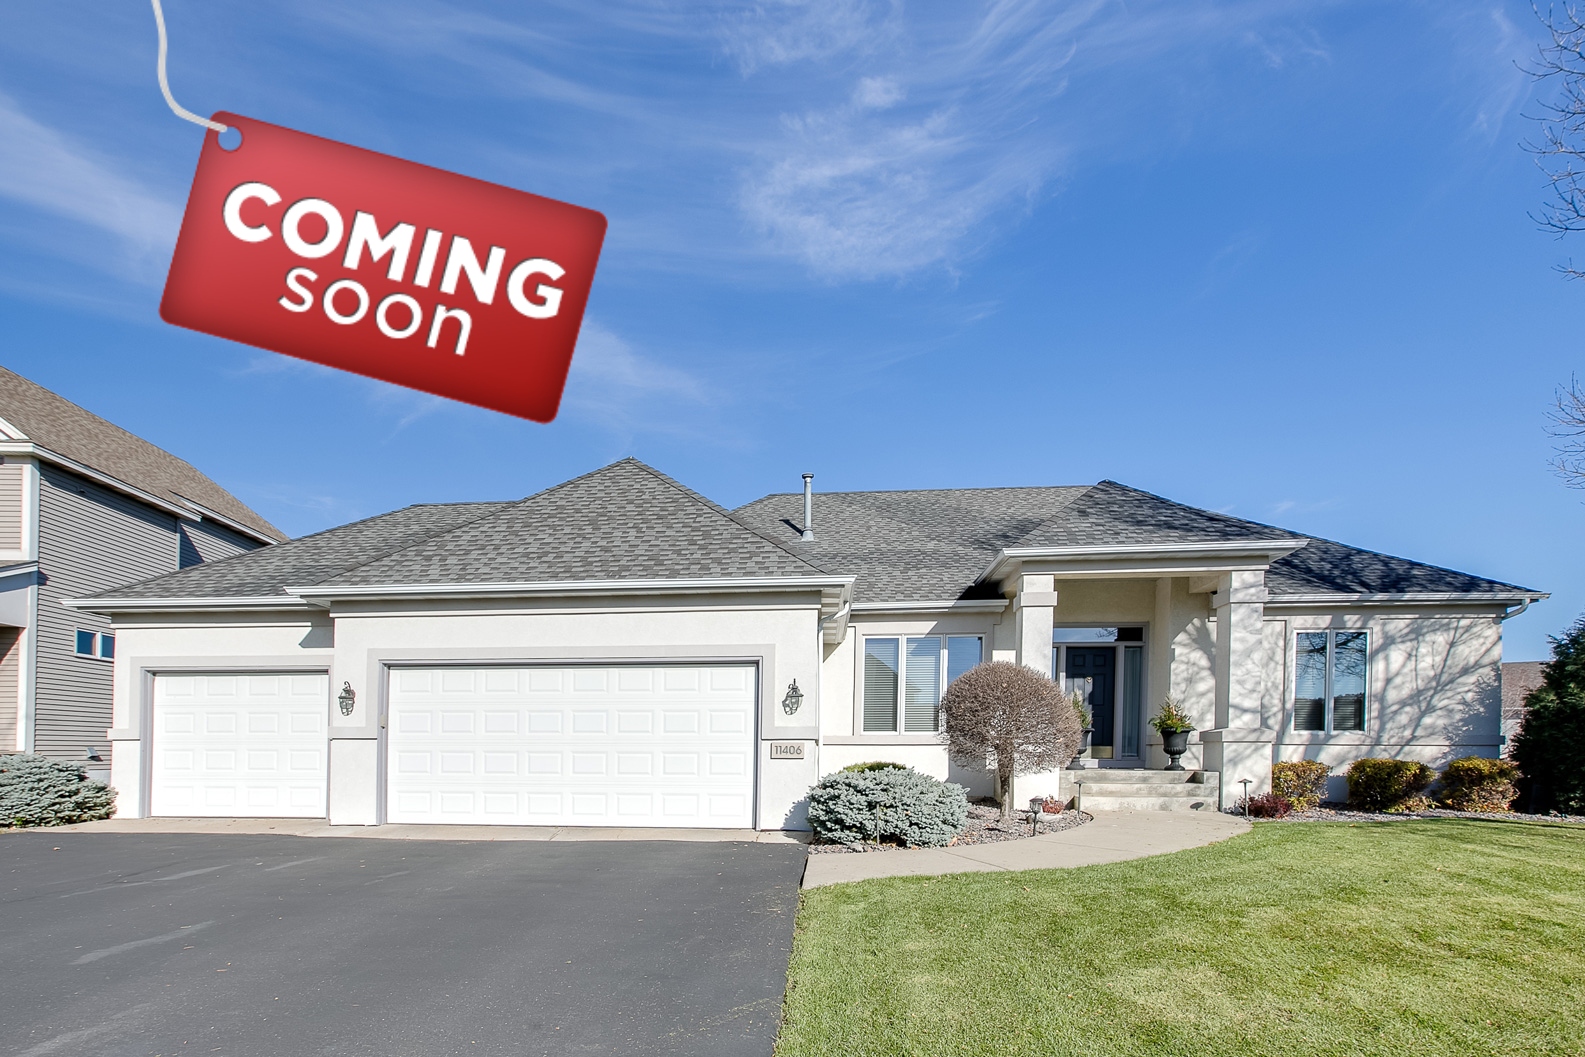 Coming soon, Champlin rambler for sale with 3 bedrooms